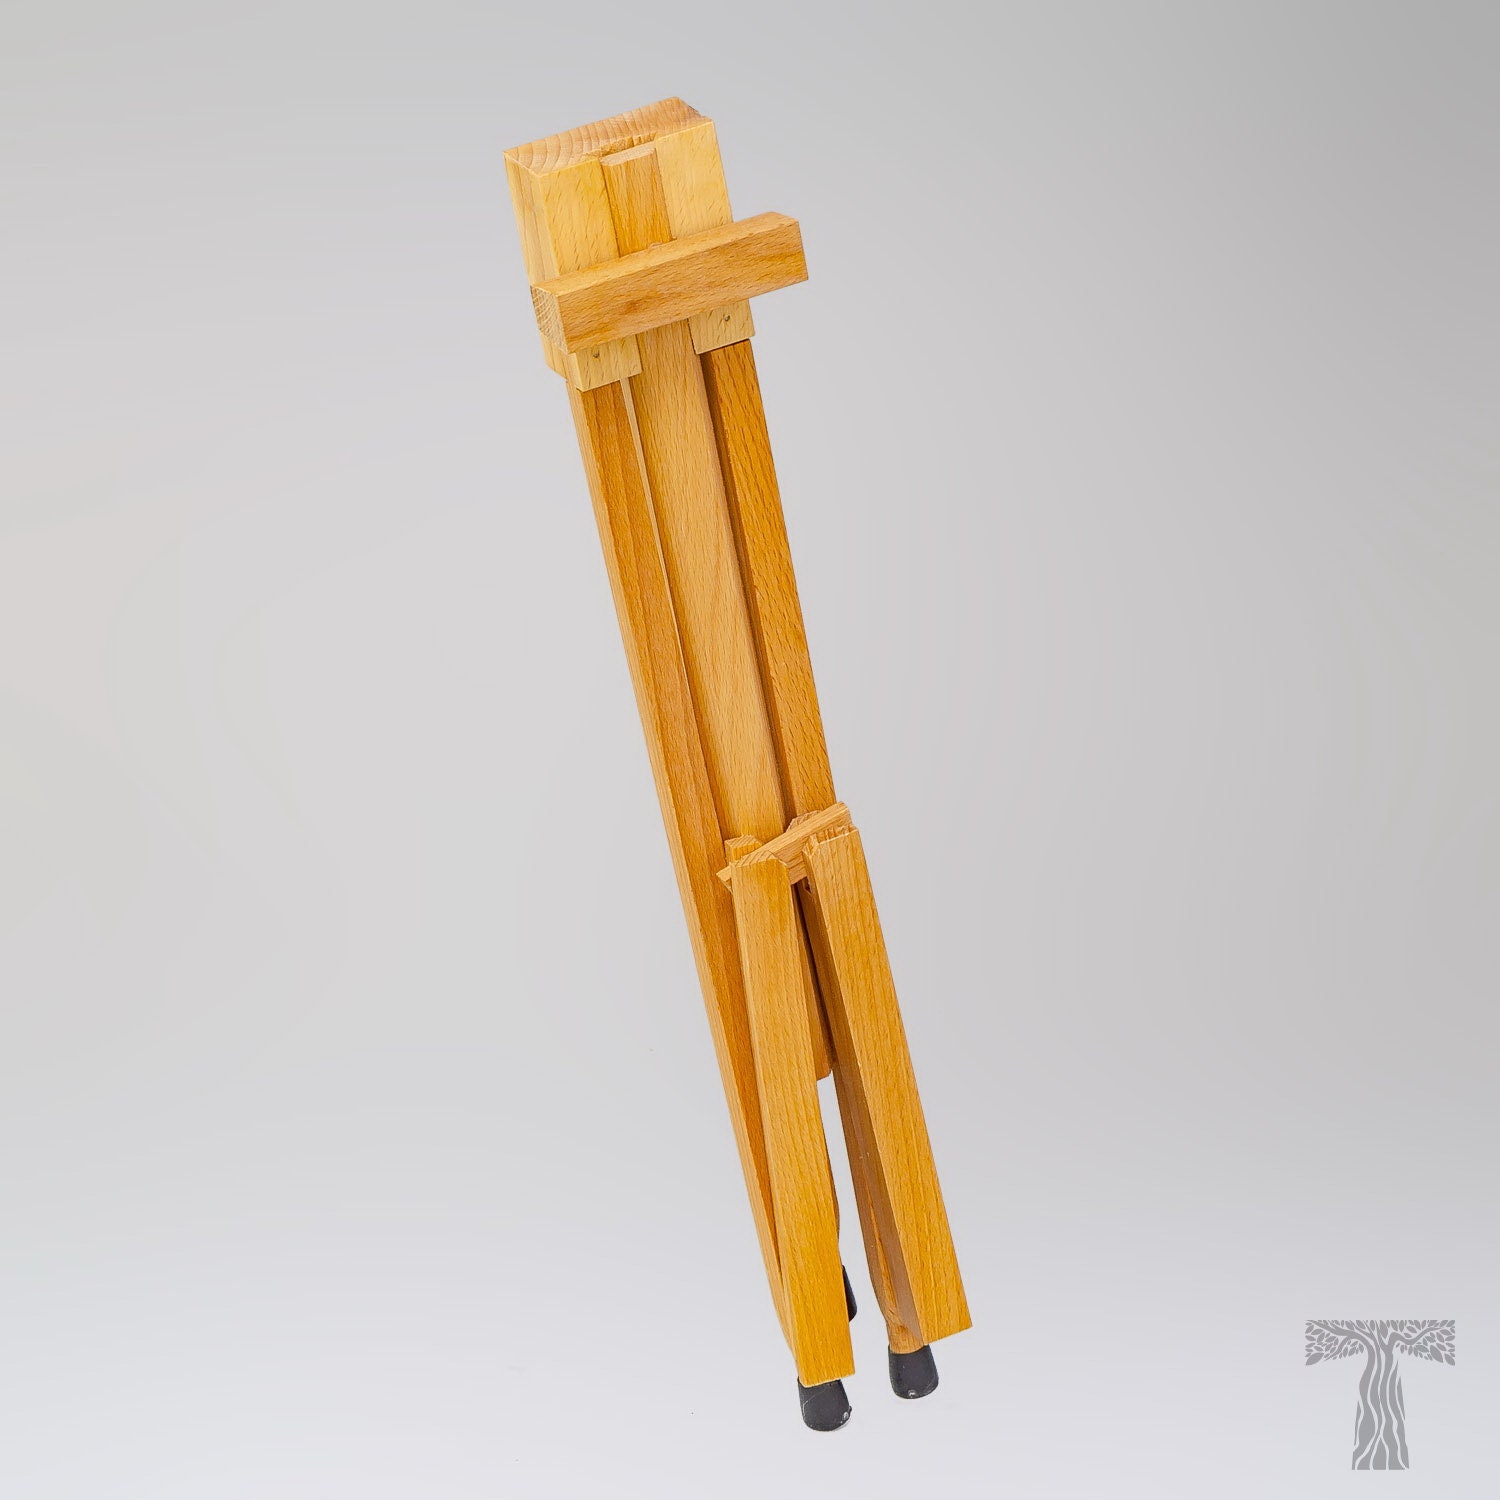 Tabletop 2 Easel Sketching Holder Painting, Easel Stand for